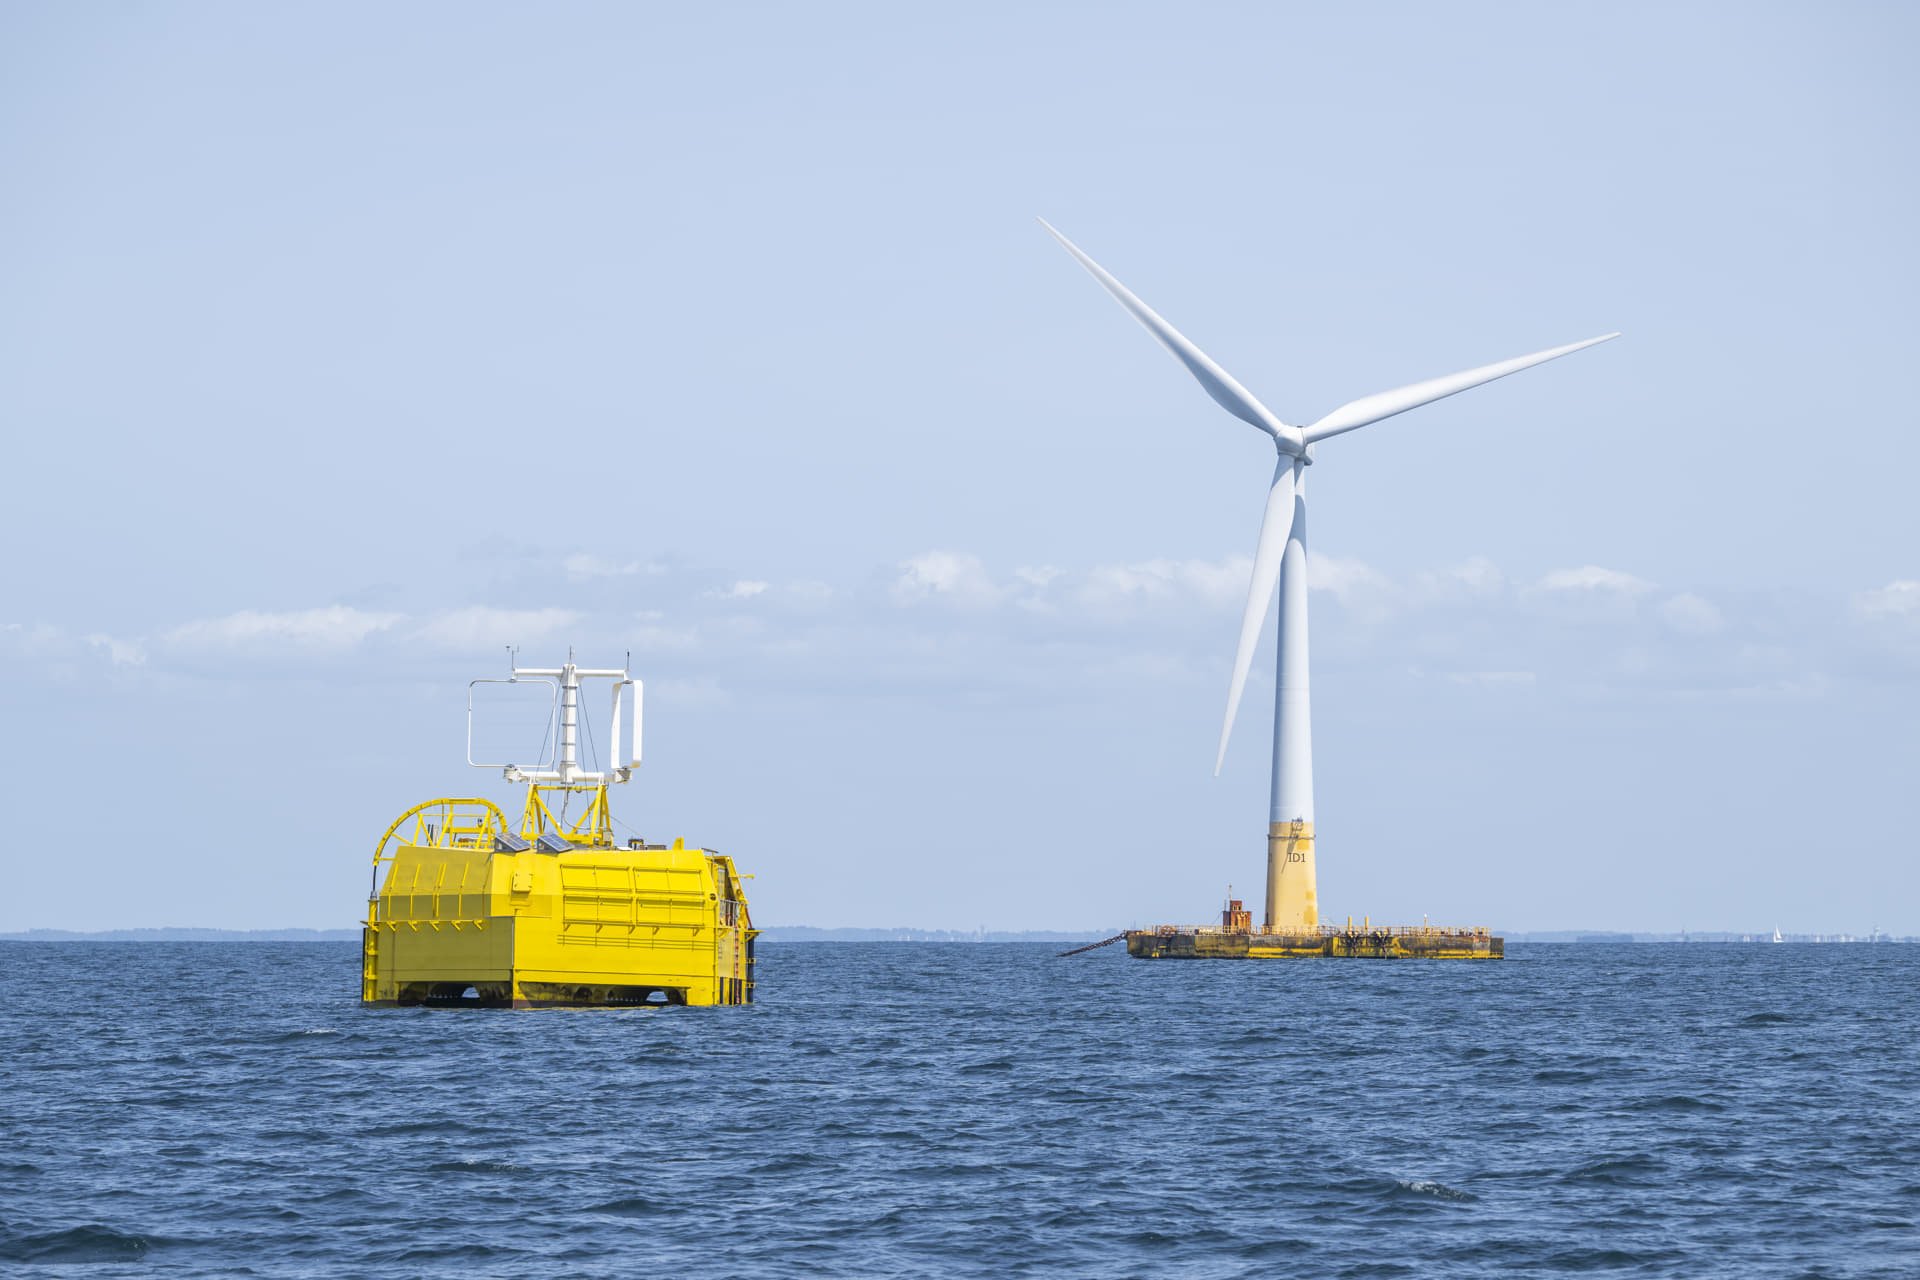 A photo of the Sealhyfe offshore green hydrogen production platform next to the Floatgen floating wind turbine